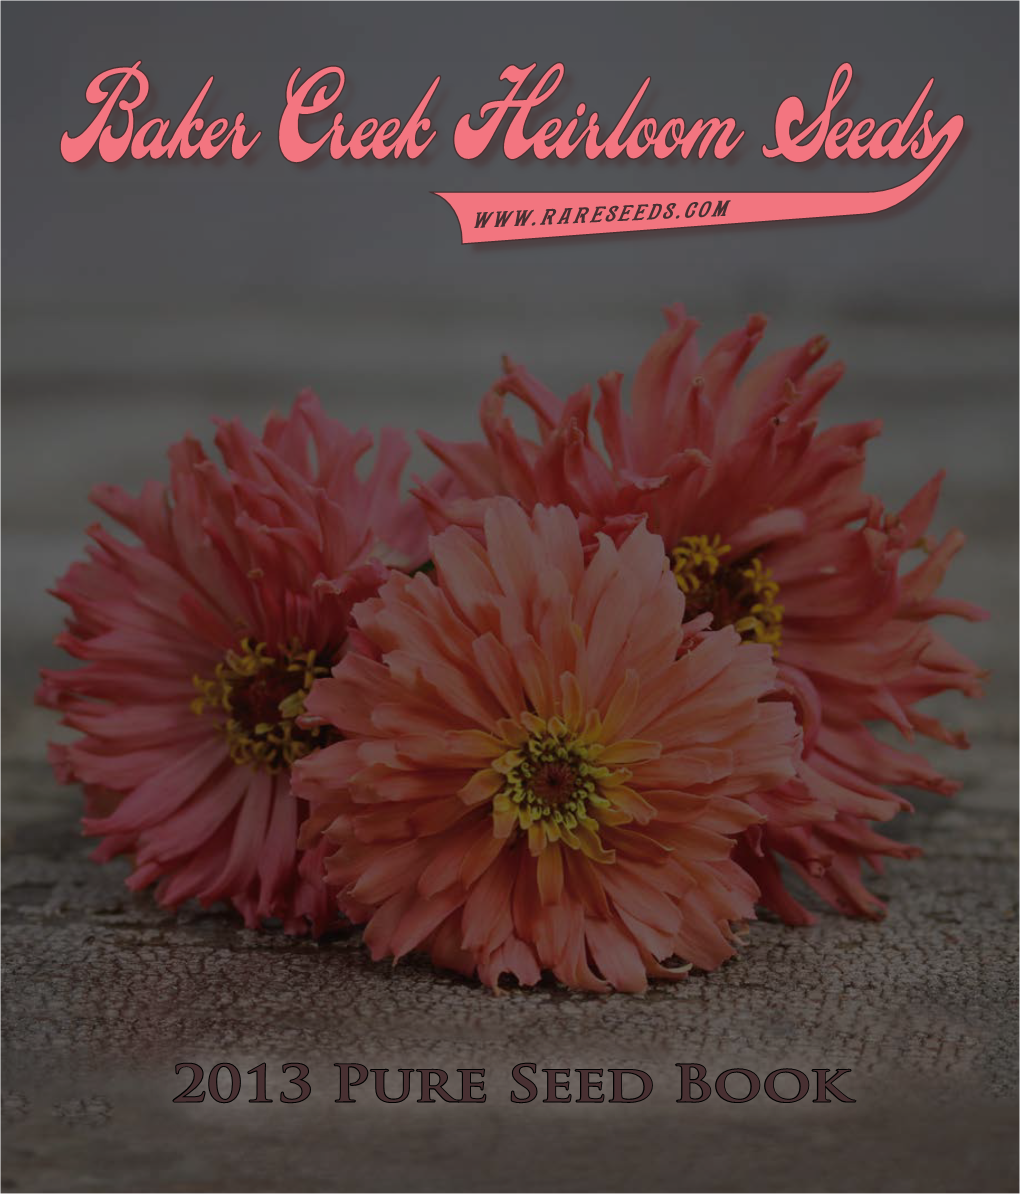 2013 Pure Seed Book Dear Gardening Friends, We Are Excited to Bring You Our 15Th Annual Seed Catalog, the Largest and We Hope the Best Yet